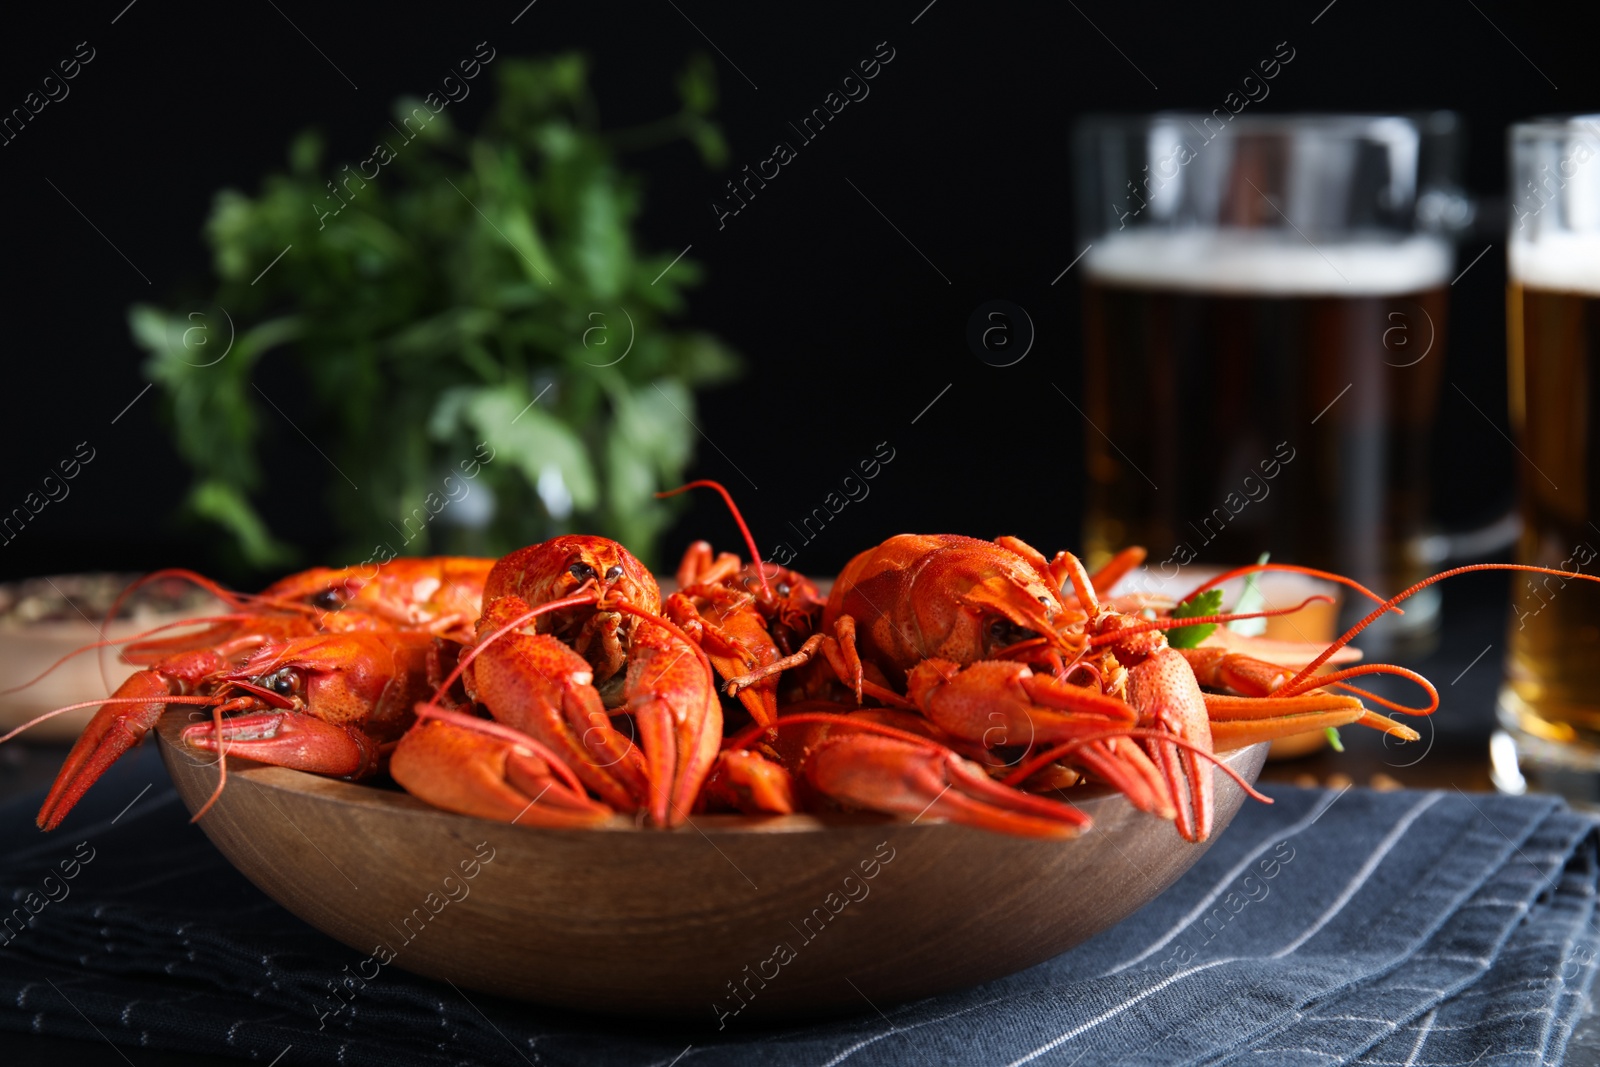 Photo of Delicious red boiled crayfishes on table against black background